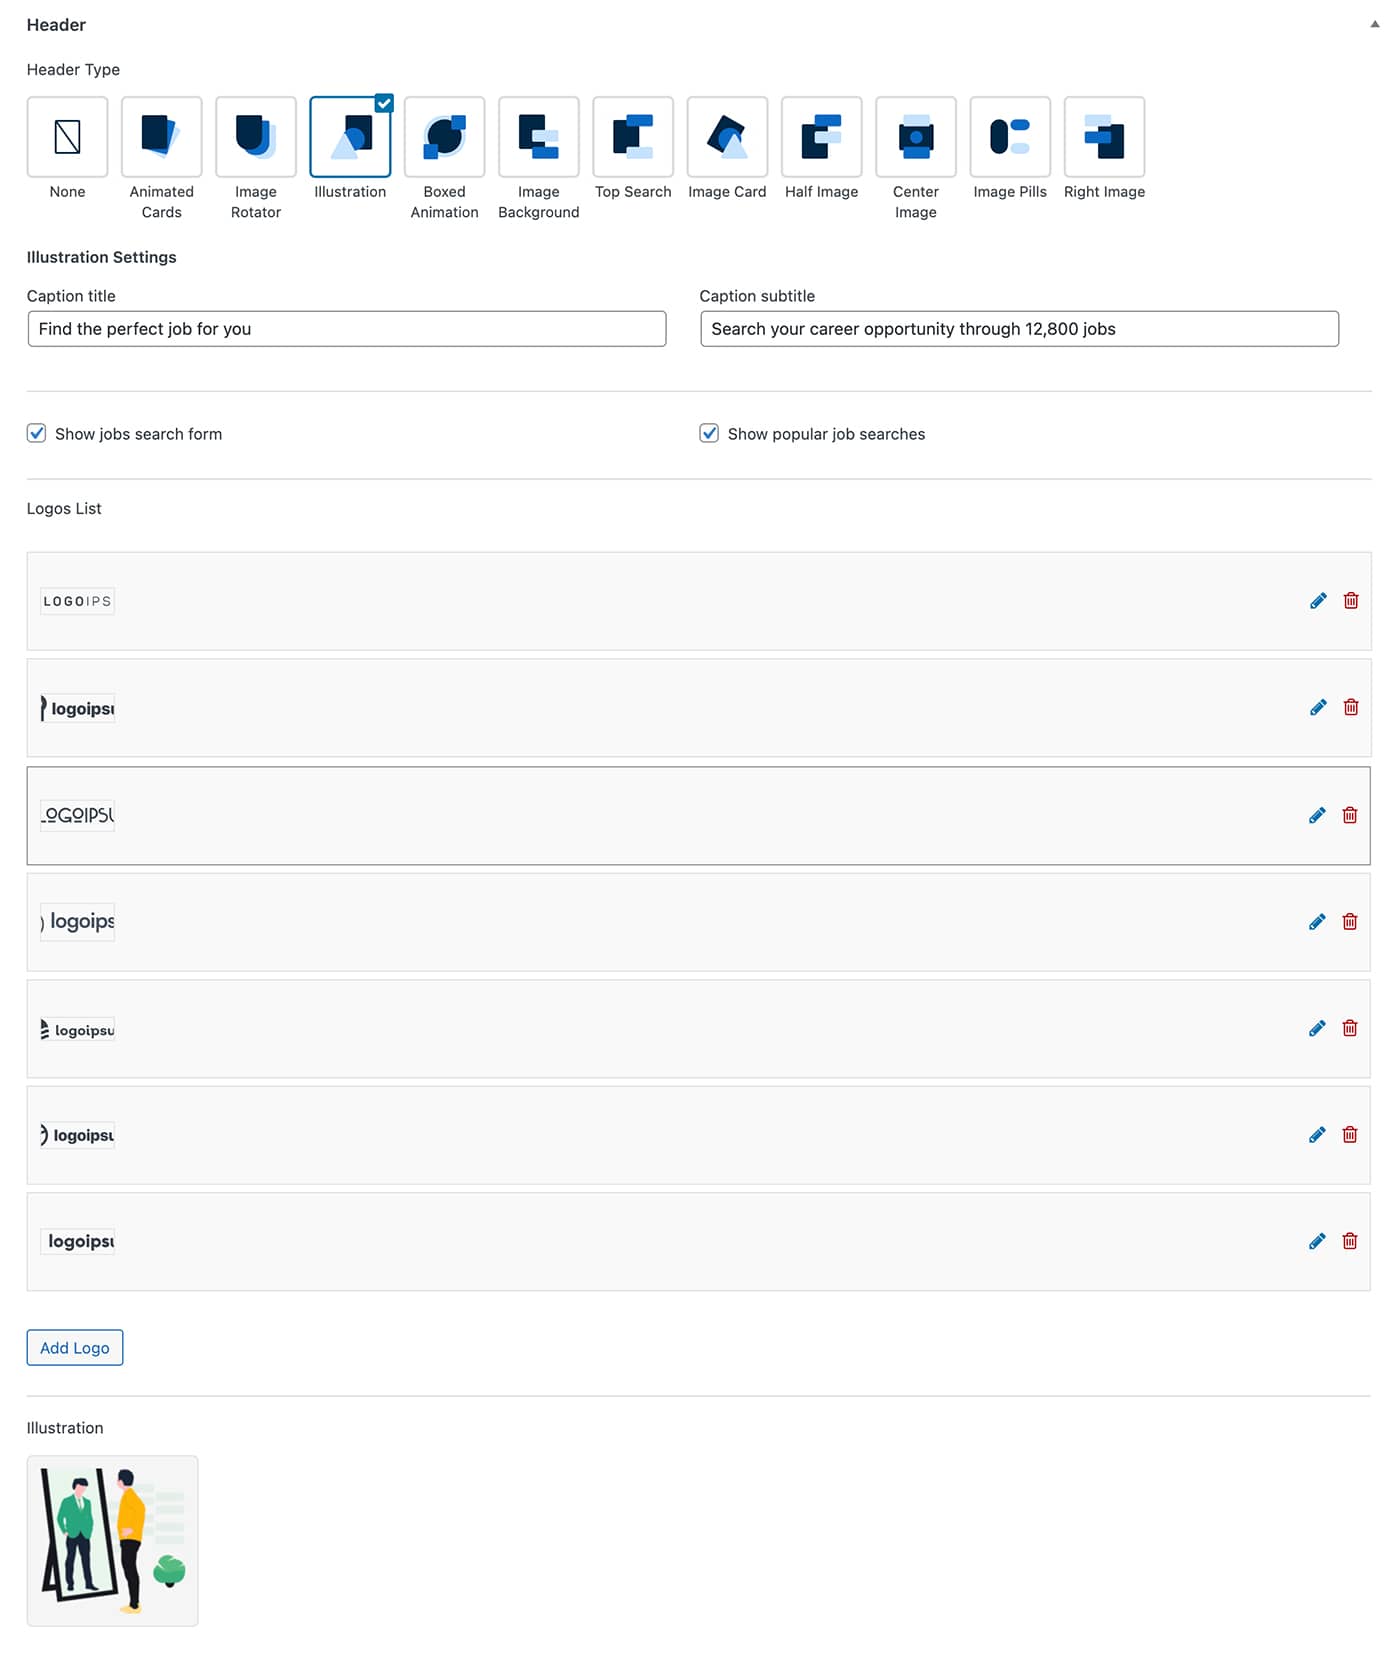 Jobster theme illustration page header settings